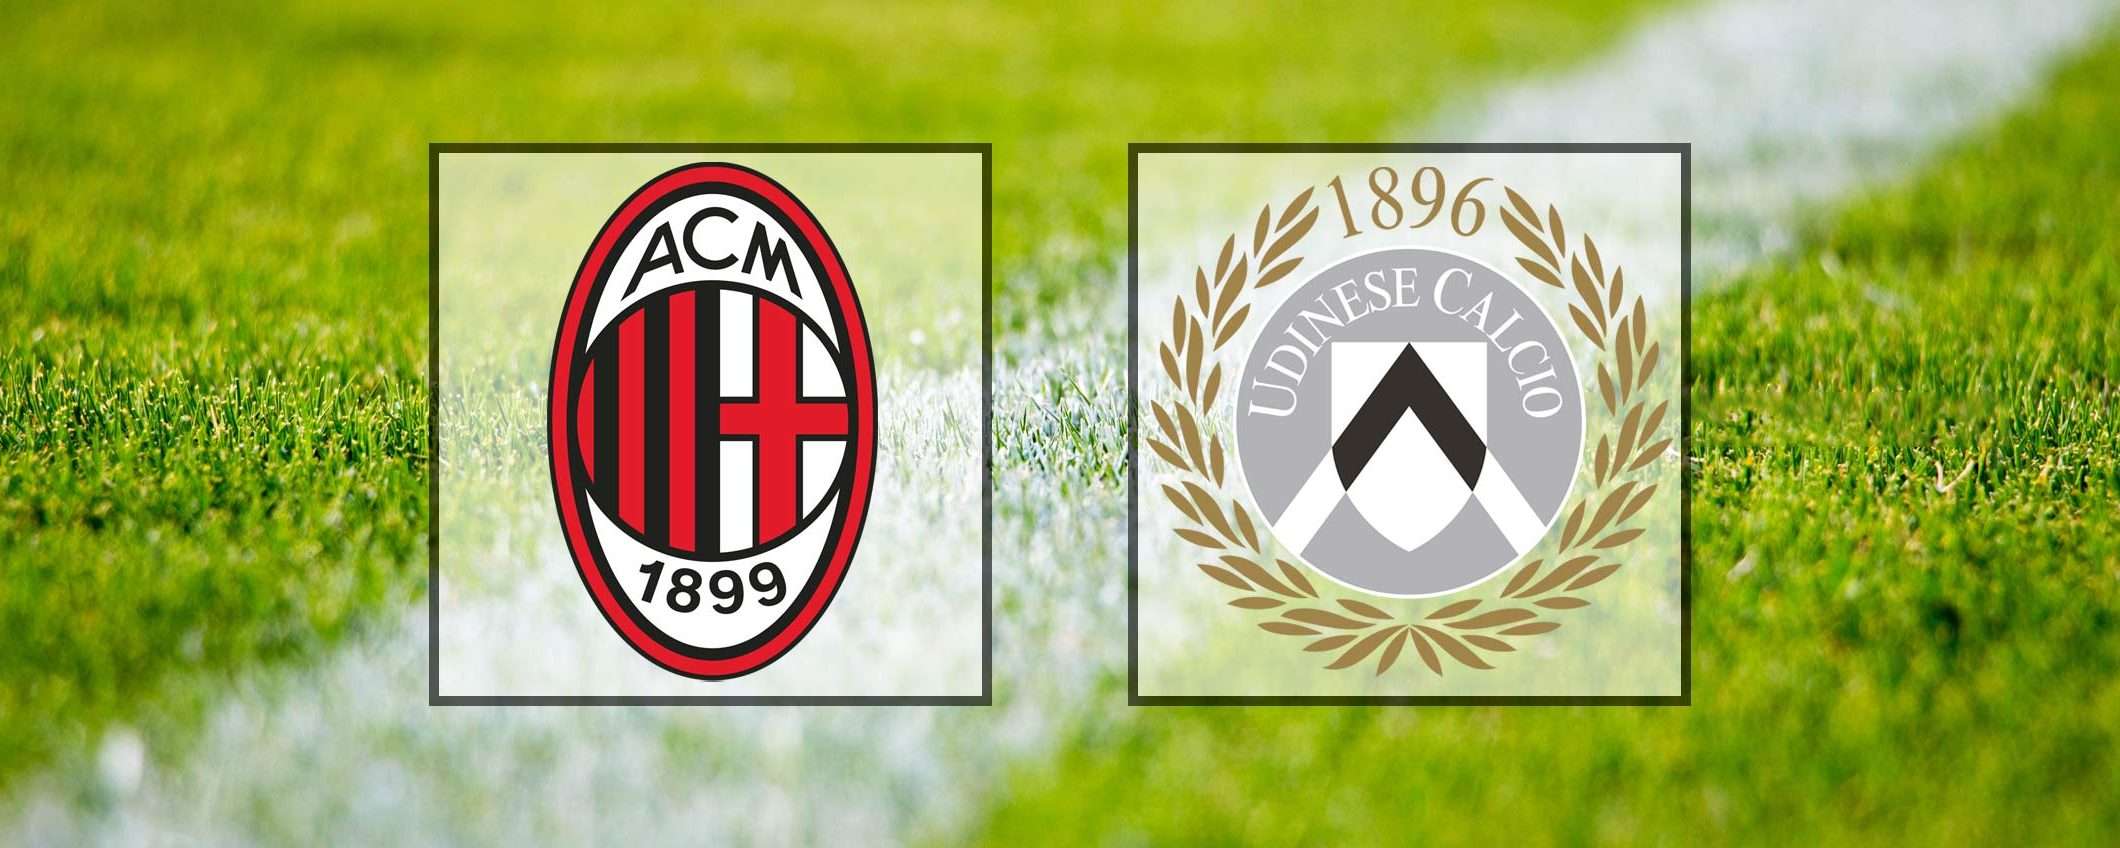 Milan-Udinese (Serie A): guardala in streaming